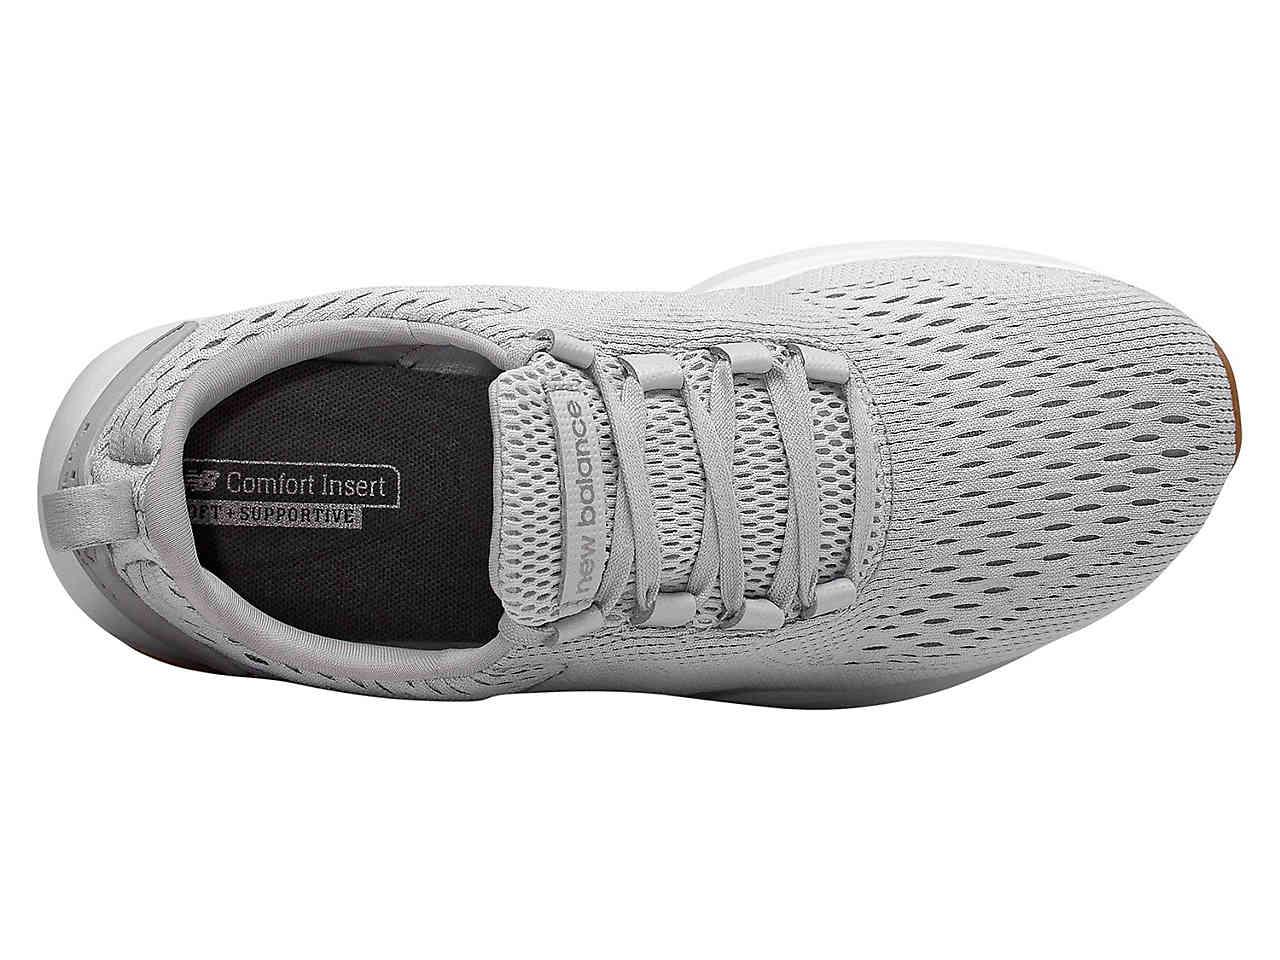 New Balance Synthetic 360 Running Shoe in Grey (Gray) | Lyst